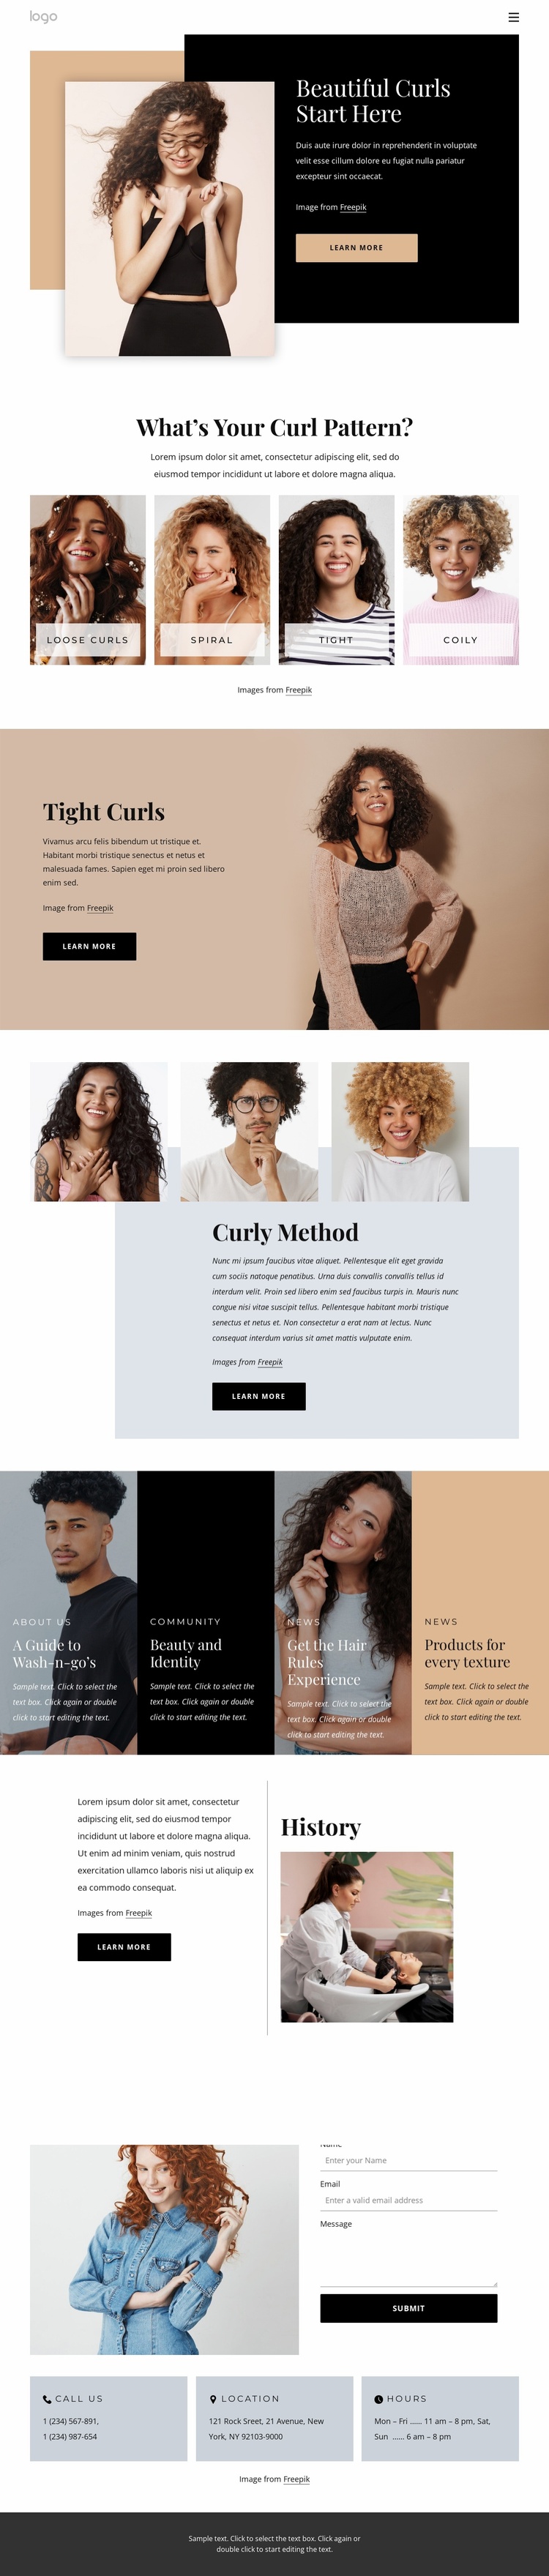 Bring out the best in your curls Landing Page